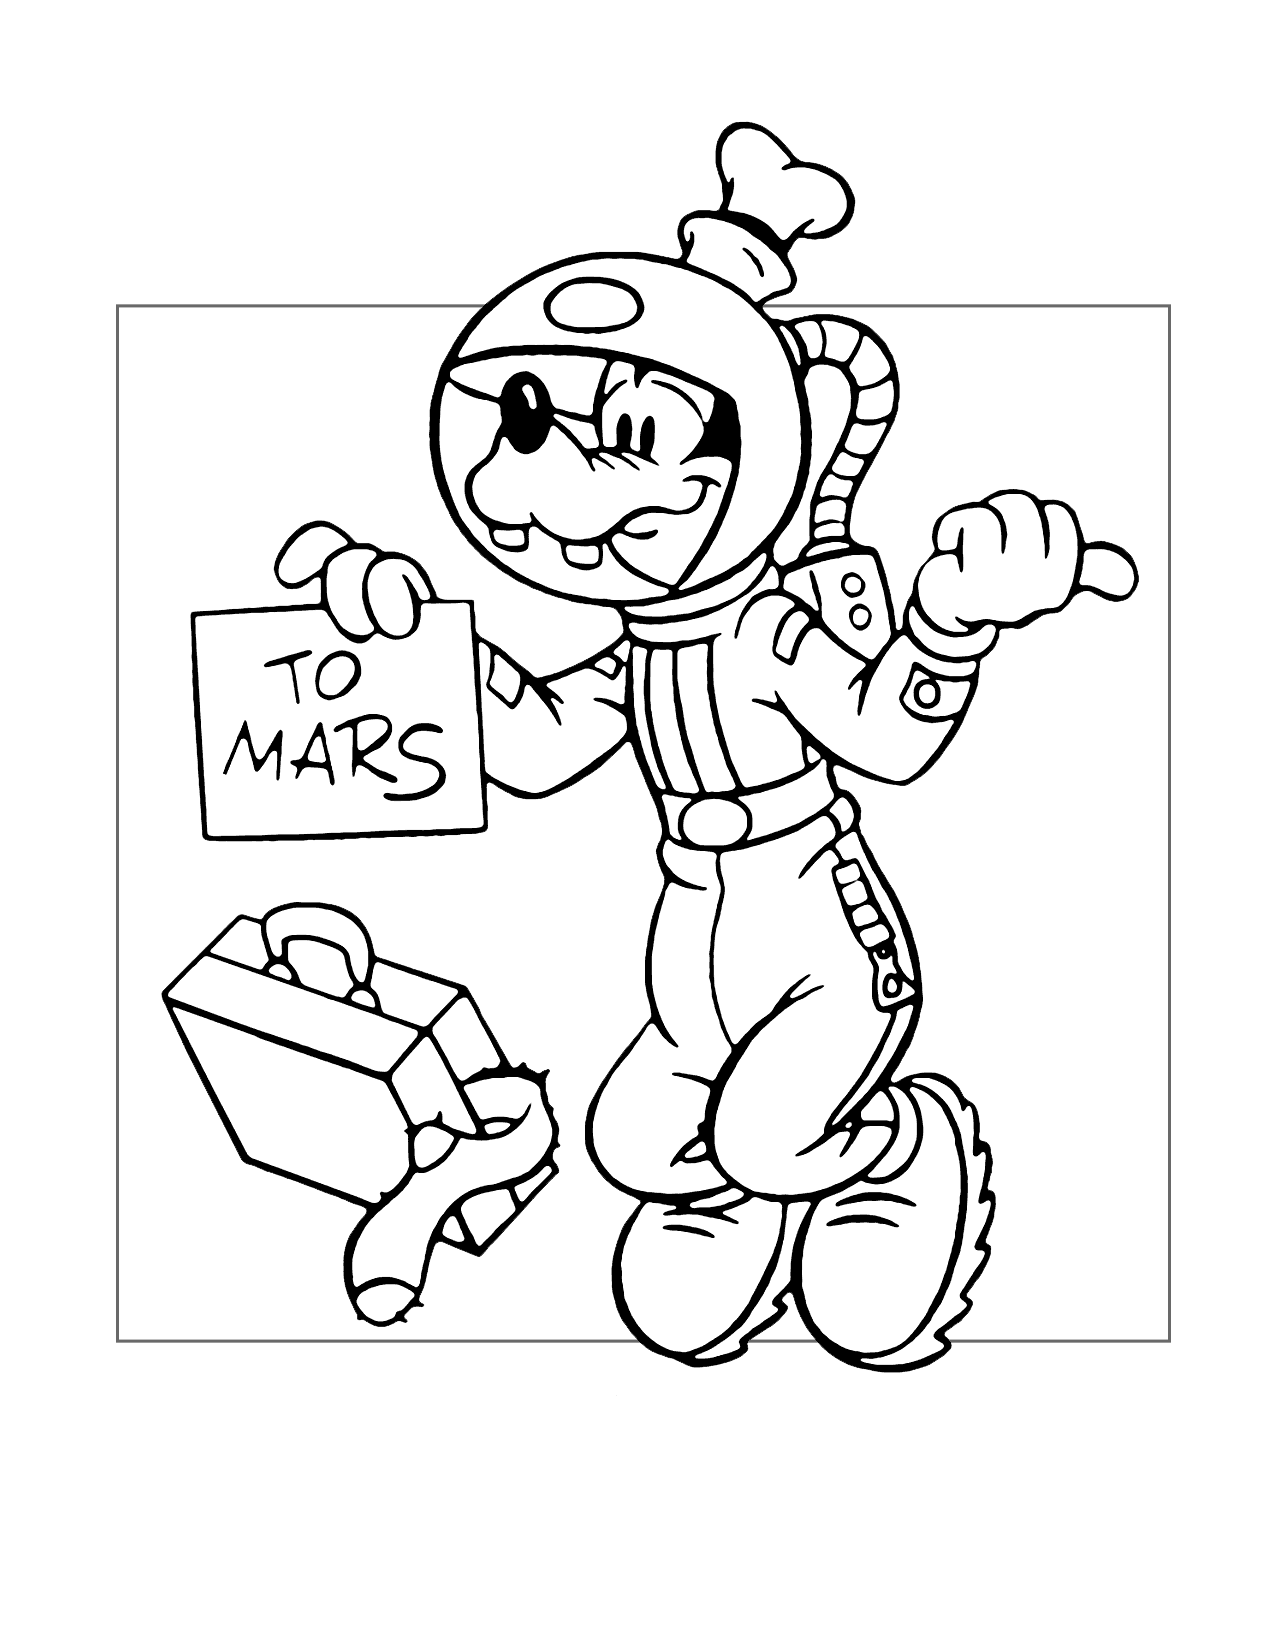 Goofy Needs A Ride To Mars Coloring Page